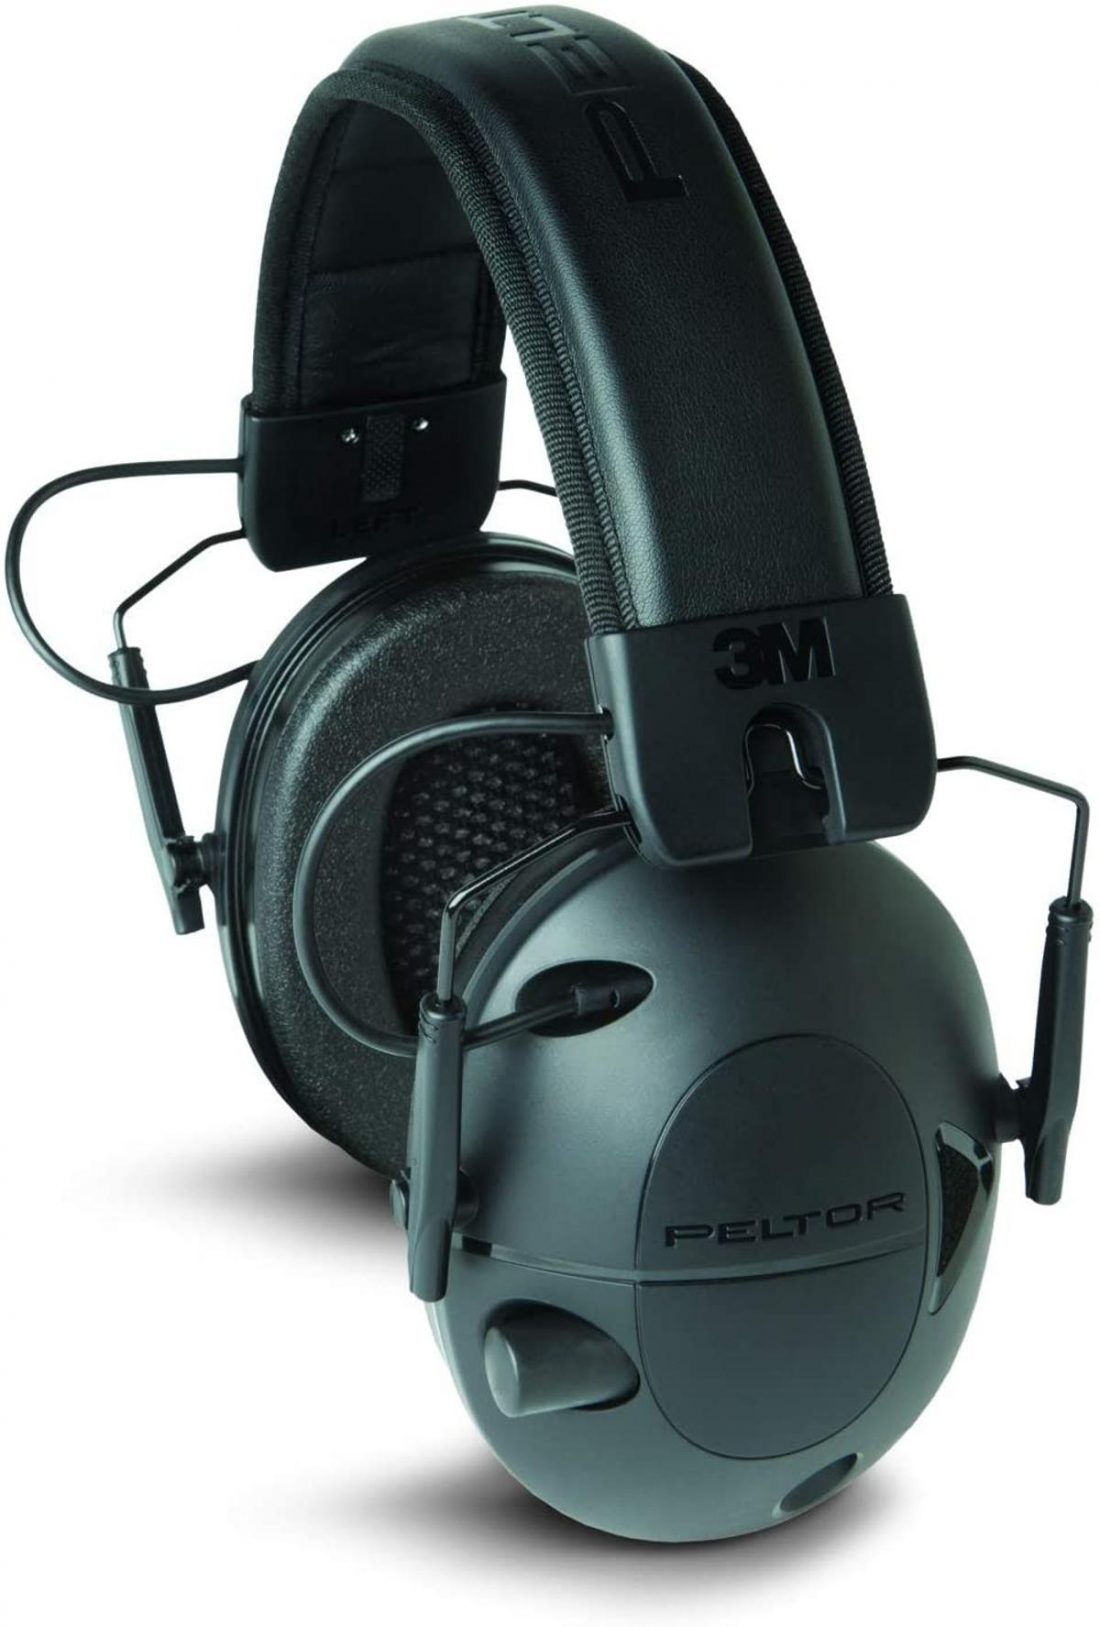 A pair of active electronic ear muffs (From: amazon.com)